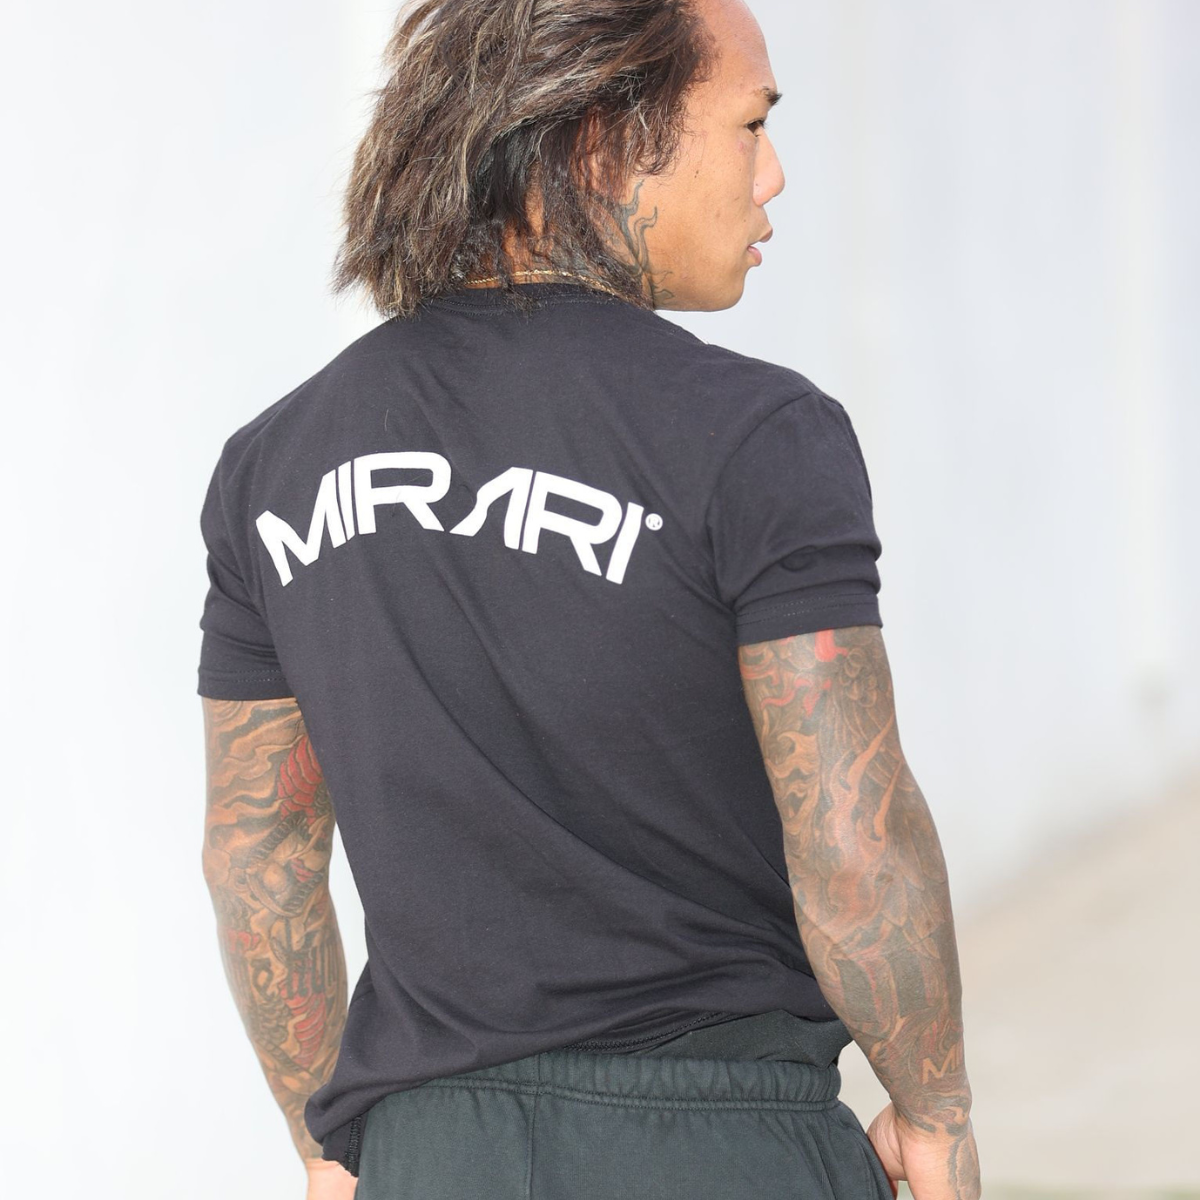 MIRARI® Active Fighter Wear Men's Athletic Fit Shirt